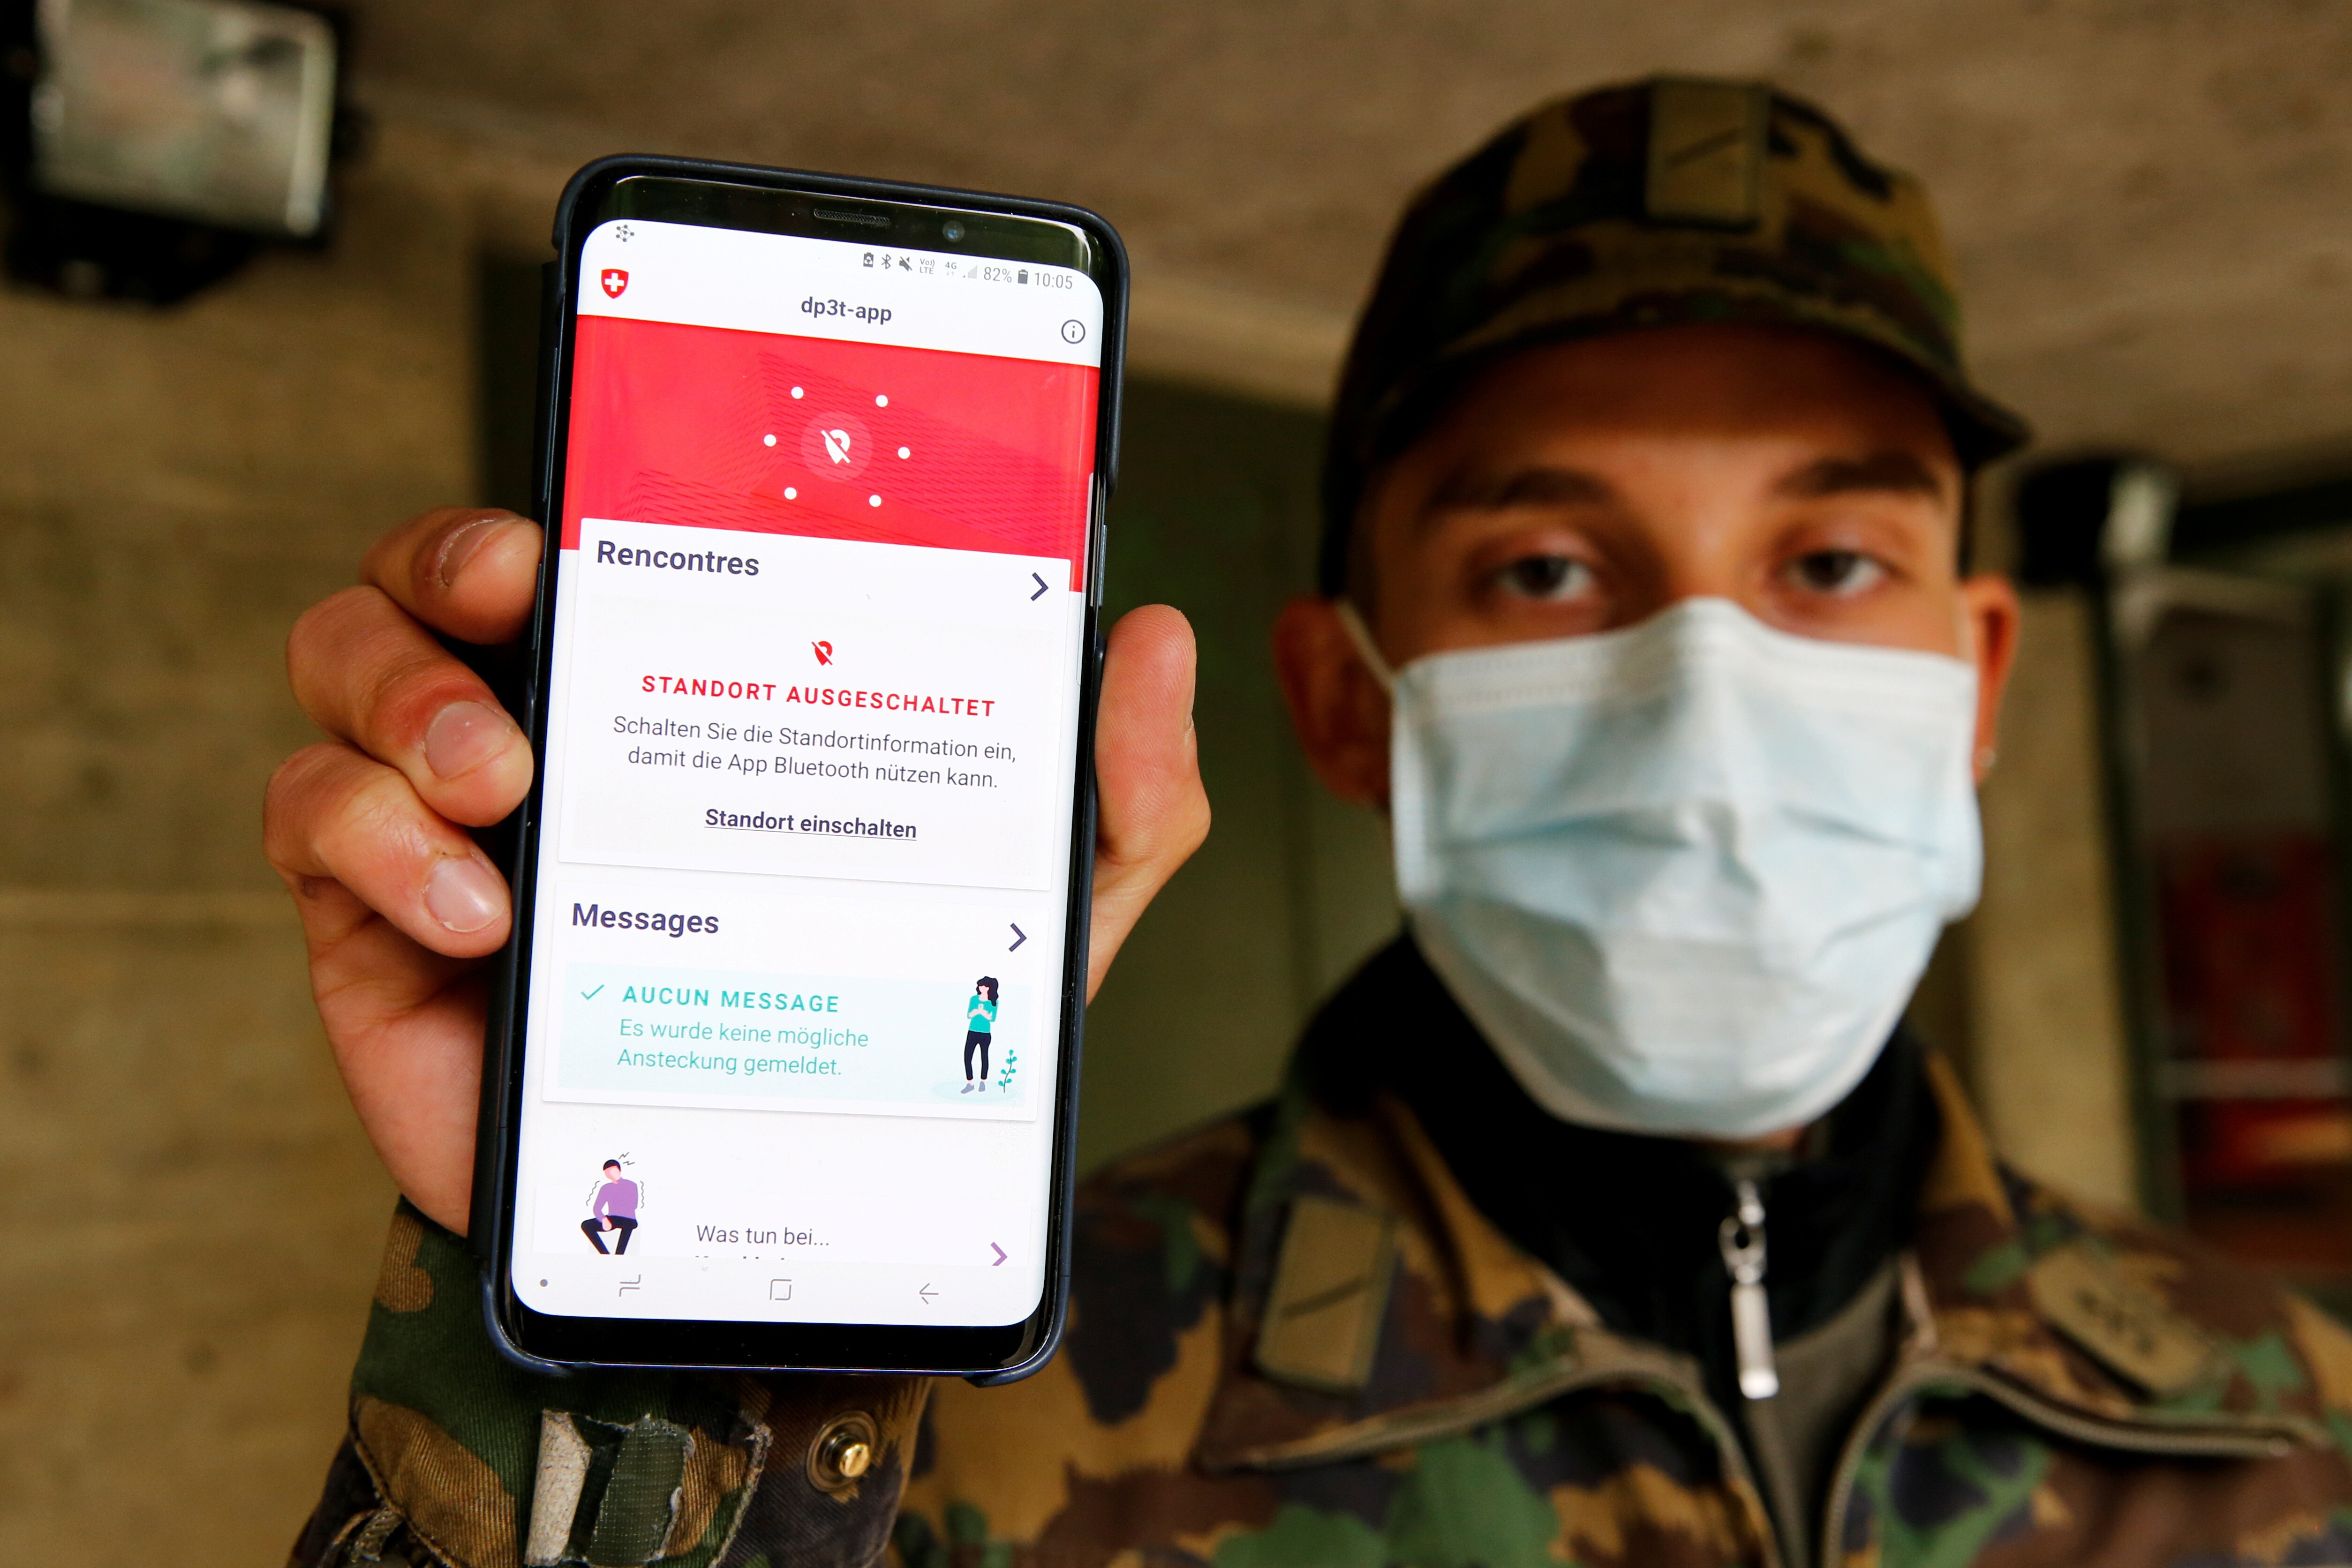 A Swiss soldier at the Chamblon barracks holds up a mobile device with the contact tracking application created by the Swiss Federal Institute of Technology Lausanne, using Bluetooth and a design called Decentralised Privacy-Preserving Proximity Tracing. Legislatures across Europe have debated how centralised their contact-tracing apps should be and how best to ensure data security. Photo: Reuters